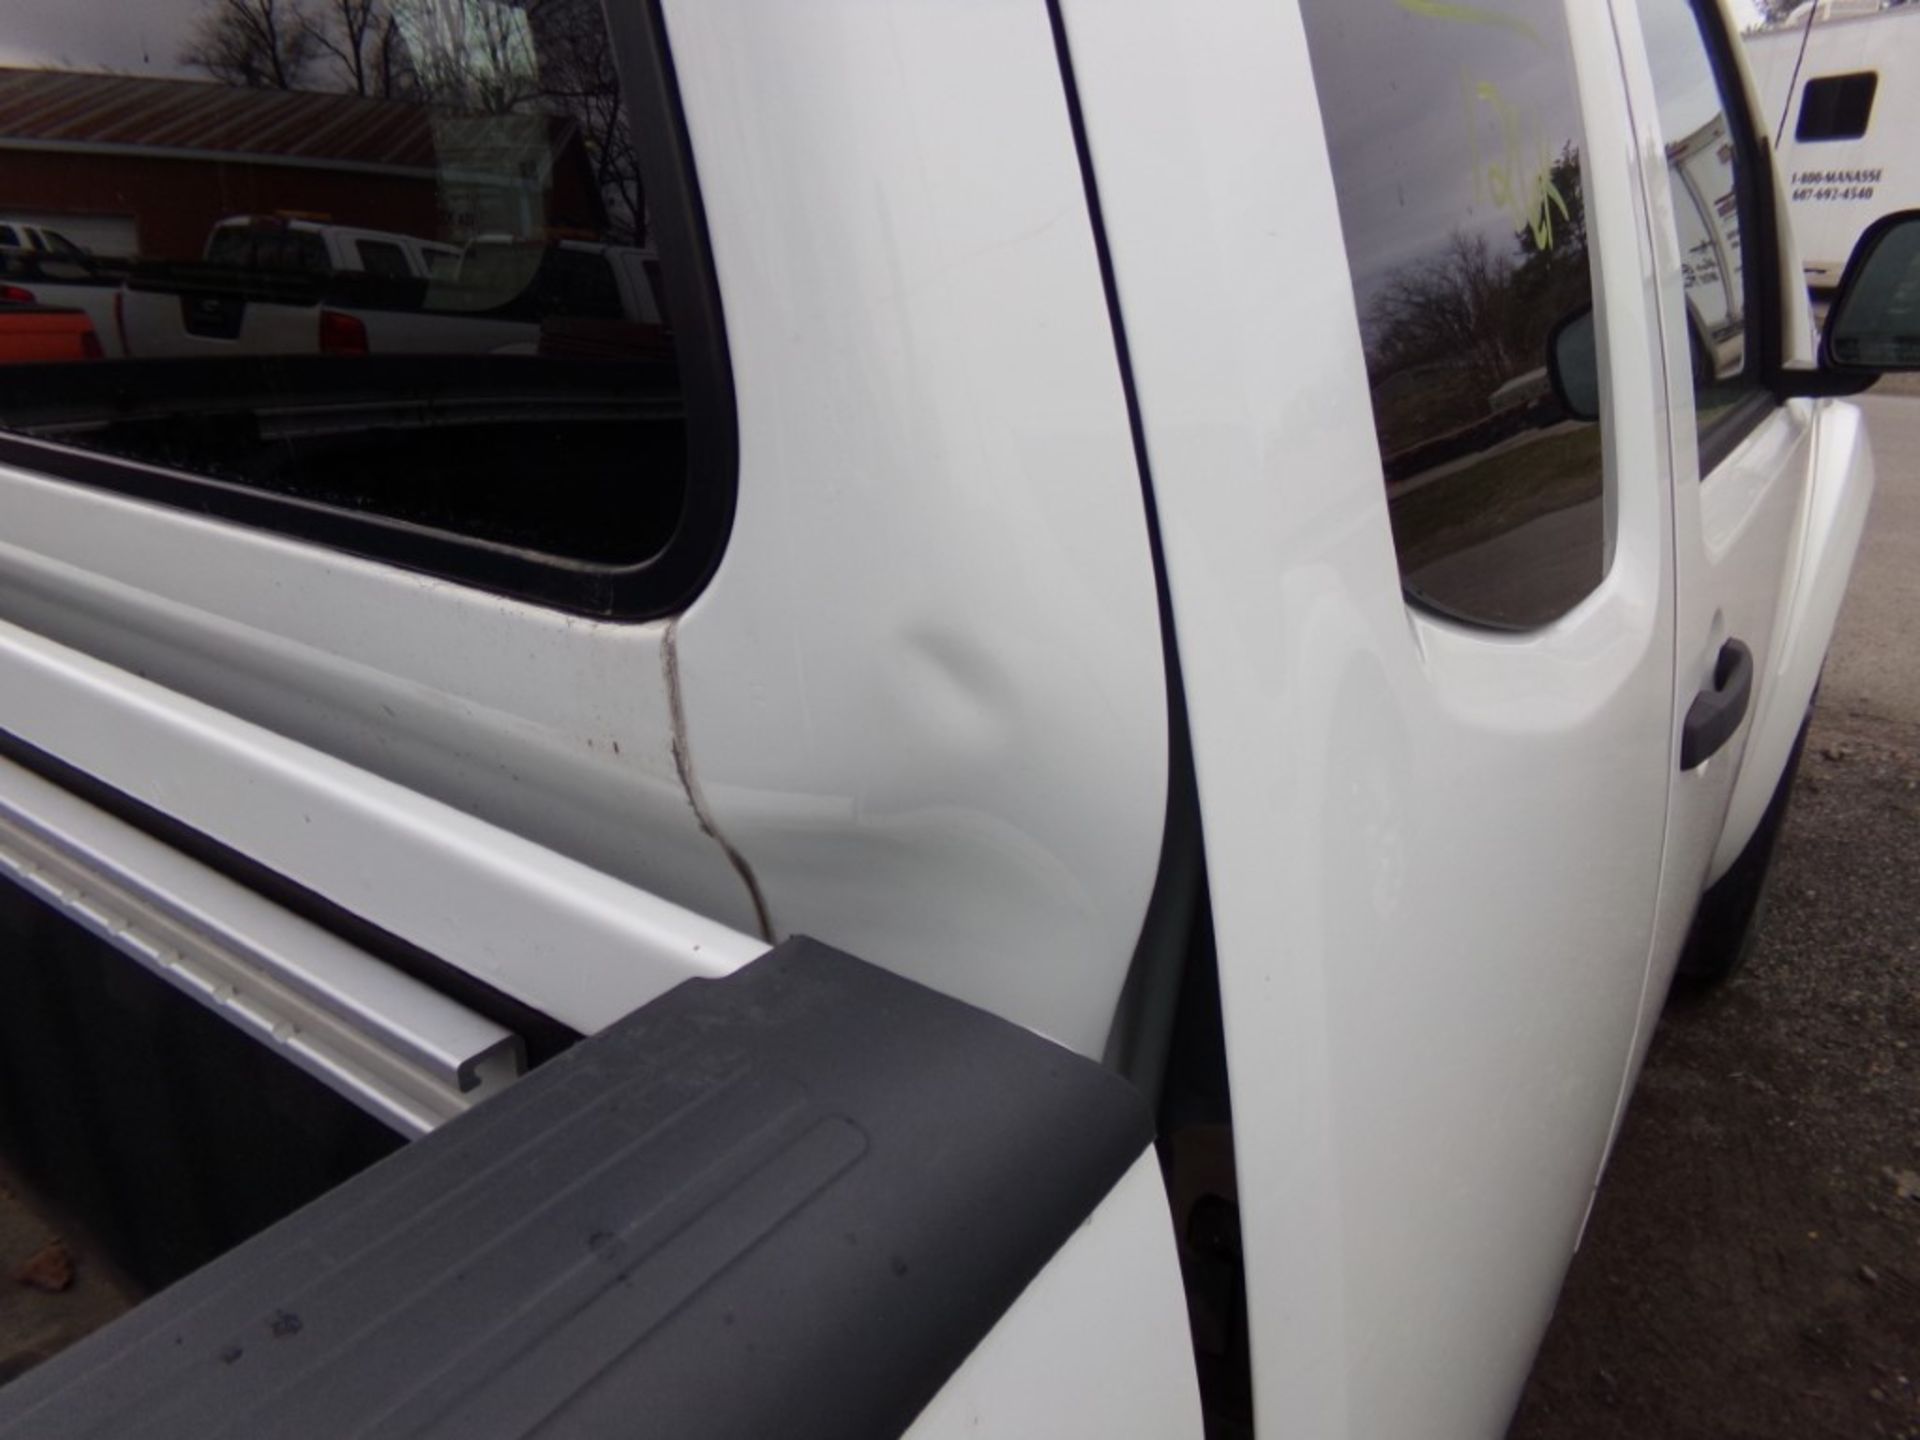 2015 Nissan Frontier SV 4 x 4 Ext. Cab, White, 126,409 Miles, Orange Light on Roof, SOME SURFACE - Image 10 of 11